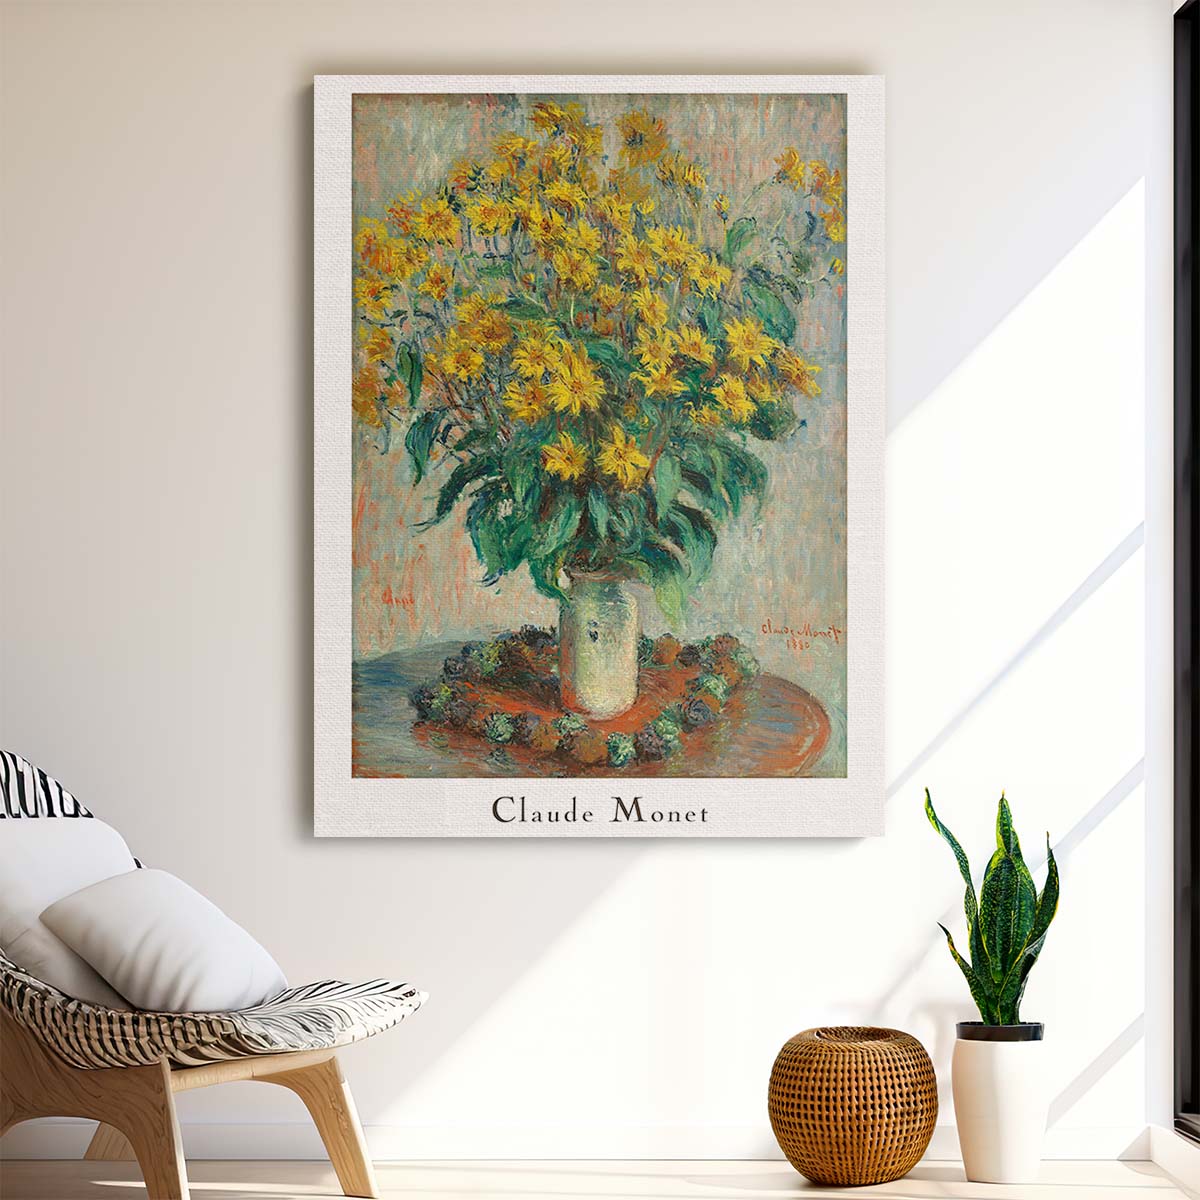 Claude Monet's Inspirational Floral Still Life Oil Painting Poster by Luxuriance Designs, made in USA